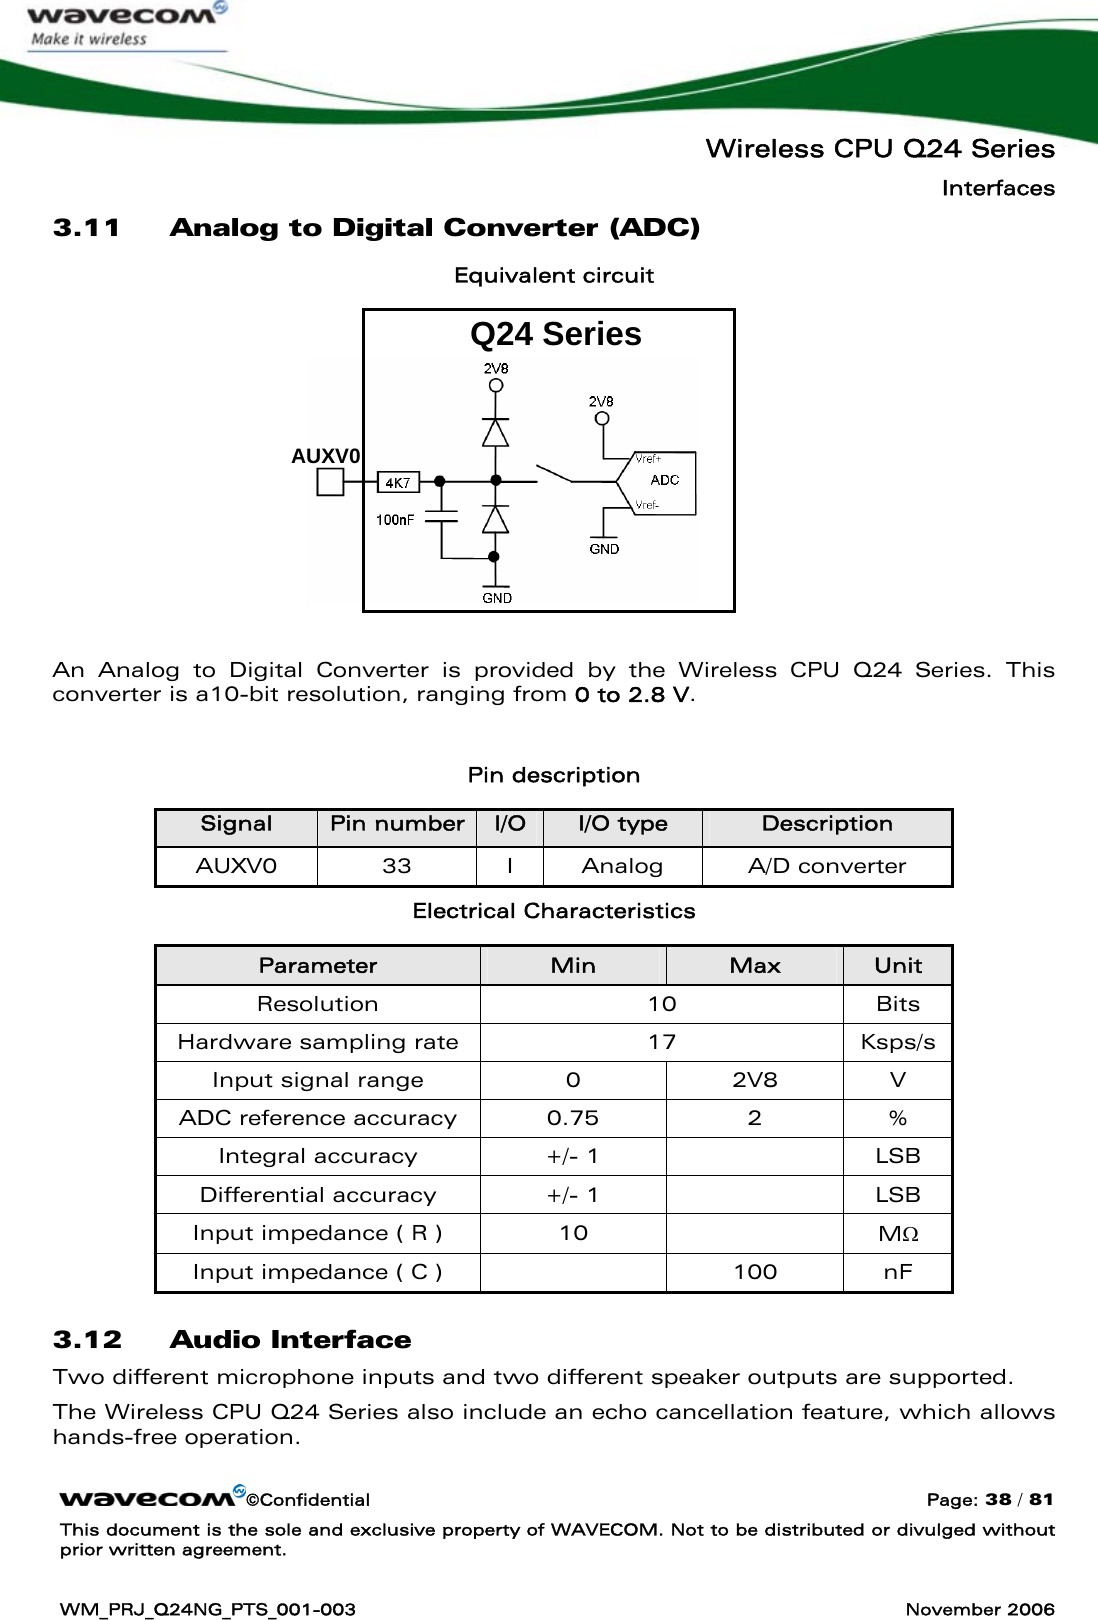   Wireless CPU Q24 Series Interfaces ©Confidential  Page: 38 / 81 This document is the sole and exclusive property of WAVECOM. Not to be distributed or divulged without prior written agreement.  WM_PRJ_Q24NG_PTS_001-003  November 2006  3.11 Analog to Digital Converter (ADC) Equivalent circuit           An Analog to Digital Converter is provided by the Wireless CPU Q24 Series. This converter is a10-bit resolution, ranging from 0 to 2.8 V.  Pin description Signal  Pin number I/O  I/O type  Description AUXV0 33 I Analog A/D converter Electrical Characteristics Parameter  Min  Max  Unit Resolution 10 Bits Hardware sampling rate  17  Ksps/s Input signal range  0  2V8  V ADC reference accuracy  0.75  2  % Integral accuracy  +/- 1    LSB Differential accuracy  +/- 1    LSB Input impedance ( R )  10    MΩ Input impedance ( C )    100  nF 3.12 Audio Interface Two different microphone inputs and two different speaker outputs are supported.  The Wireless CPU Q24 Series also include an echo cancellation feature, which allows hands-free operation. AUXV0 Q24 Series 